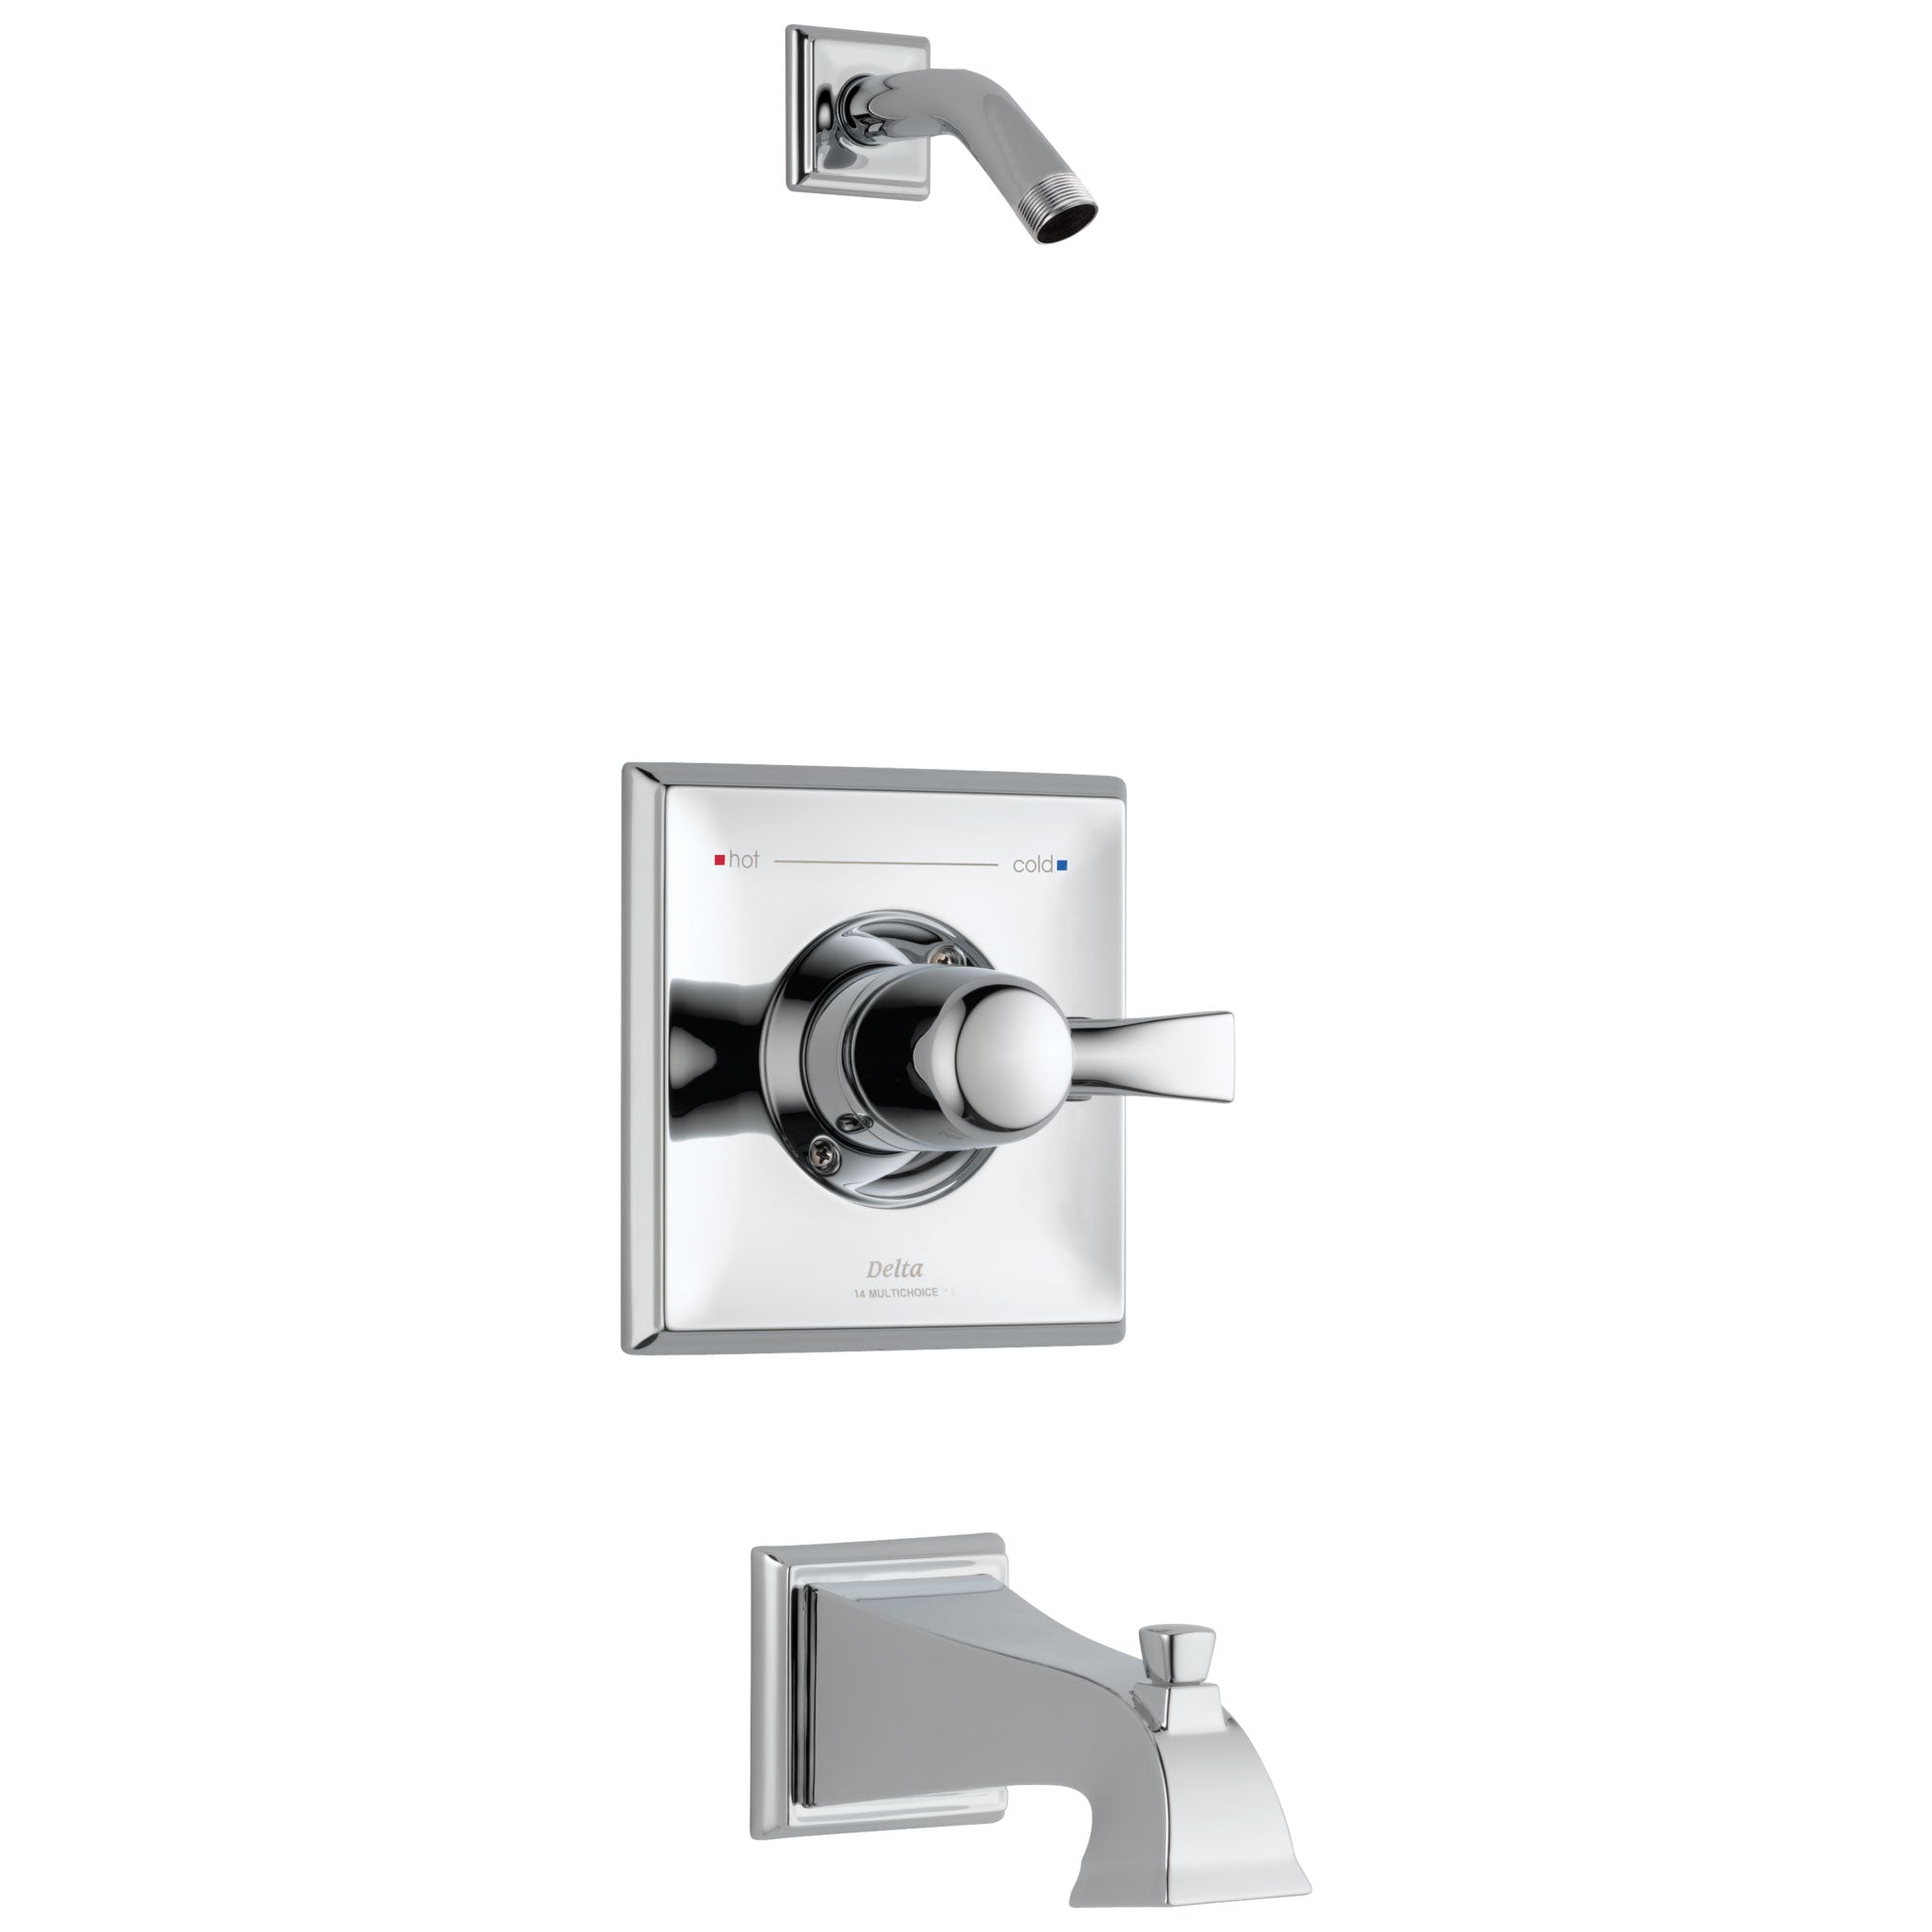 Delta Dryden Collection Chrome Monitor 14 Pressure and Temp Balanced Tub and Shower Faucet Combo Trim - Less Showerhead Includes Valve without Stops D2413V